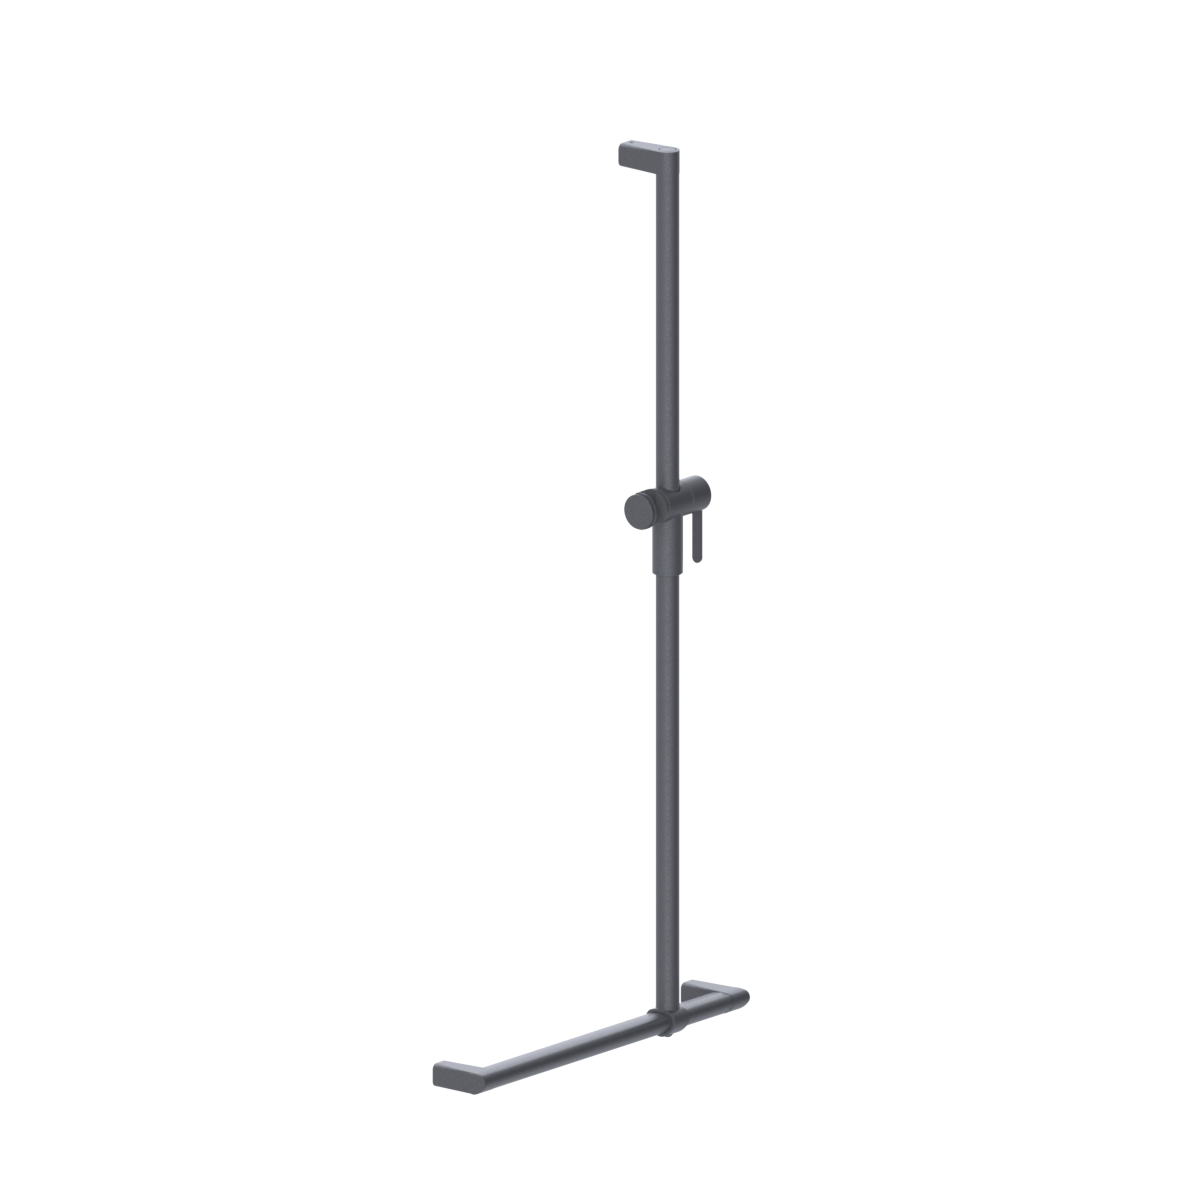 Cavere Care Shower handrail, with movable shower handrail, 500 x 1100 mm, single-point mounting, Cavere Metallic anthracite